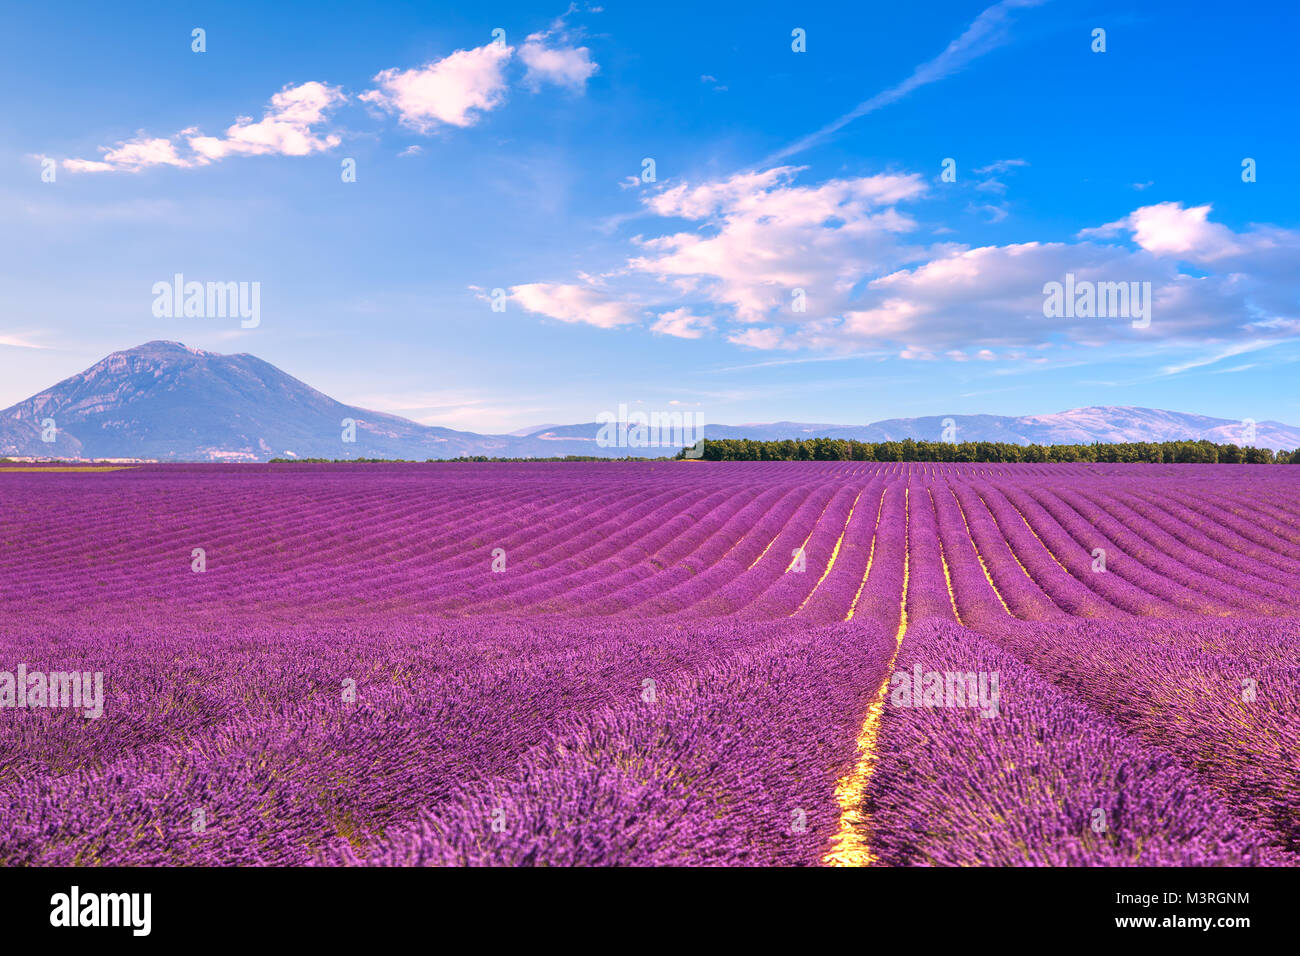 Lavender flowers blooming scented fields in endless rows. Landscape in Valensole plateau, Provence, France, Europe. Stock Photo